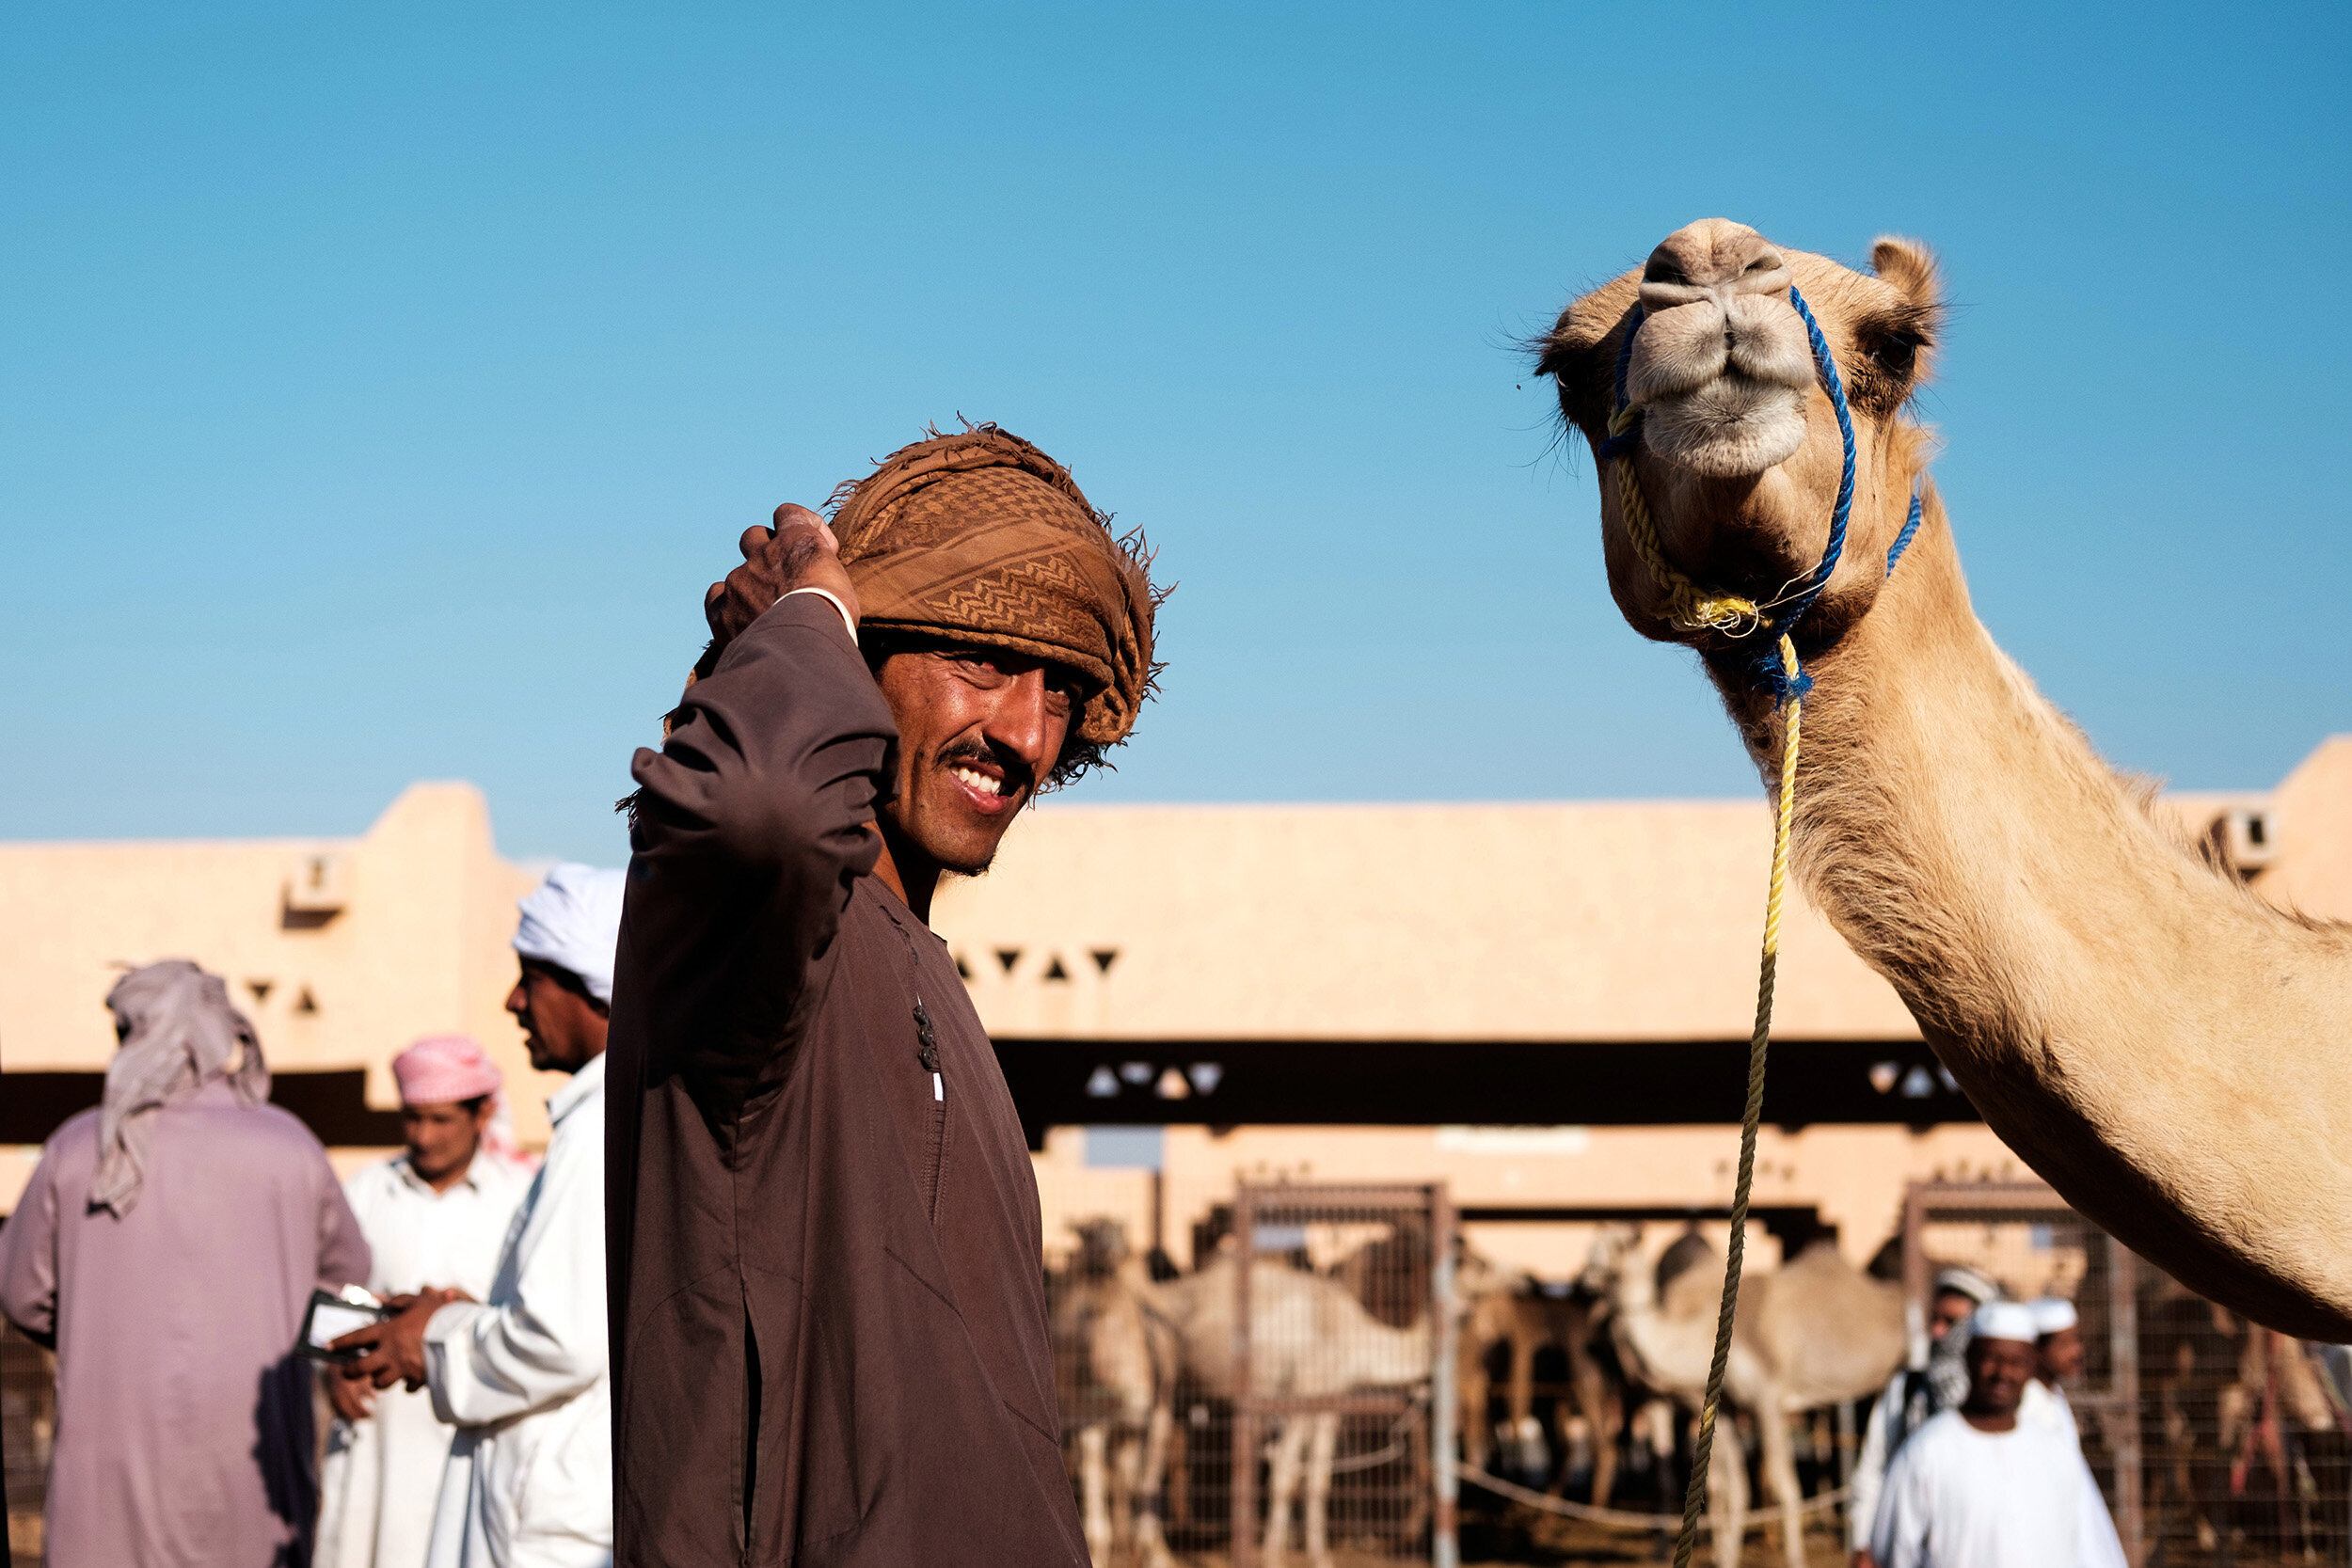 A man poses with his camel at the camel souk in Al Ain, Untied Arab Emirates. Sample image from a Fujifilm XF 35mm f/2 R WR